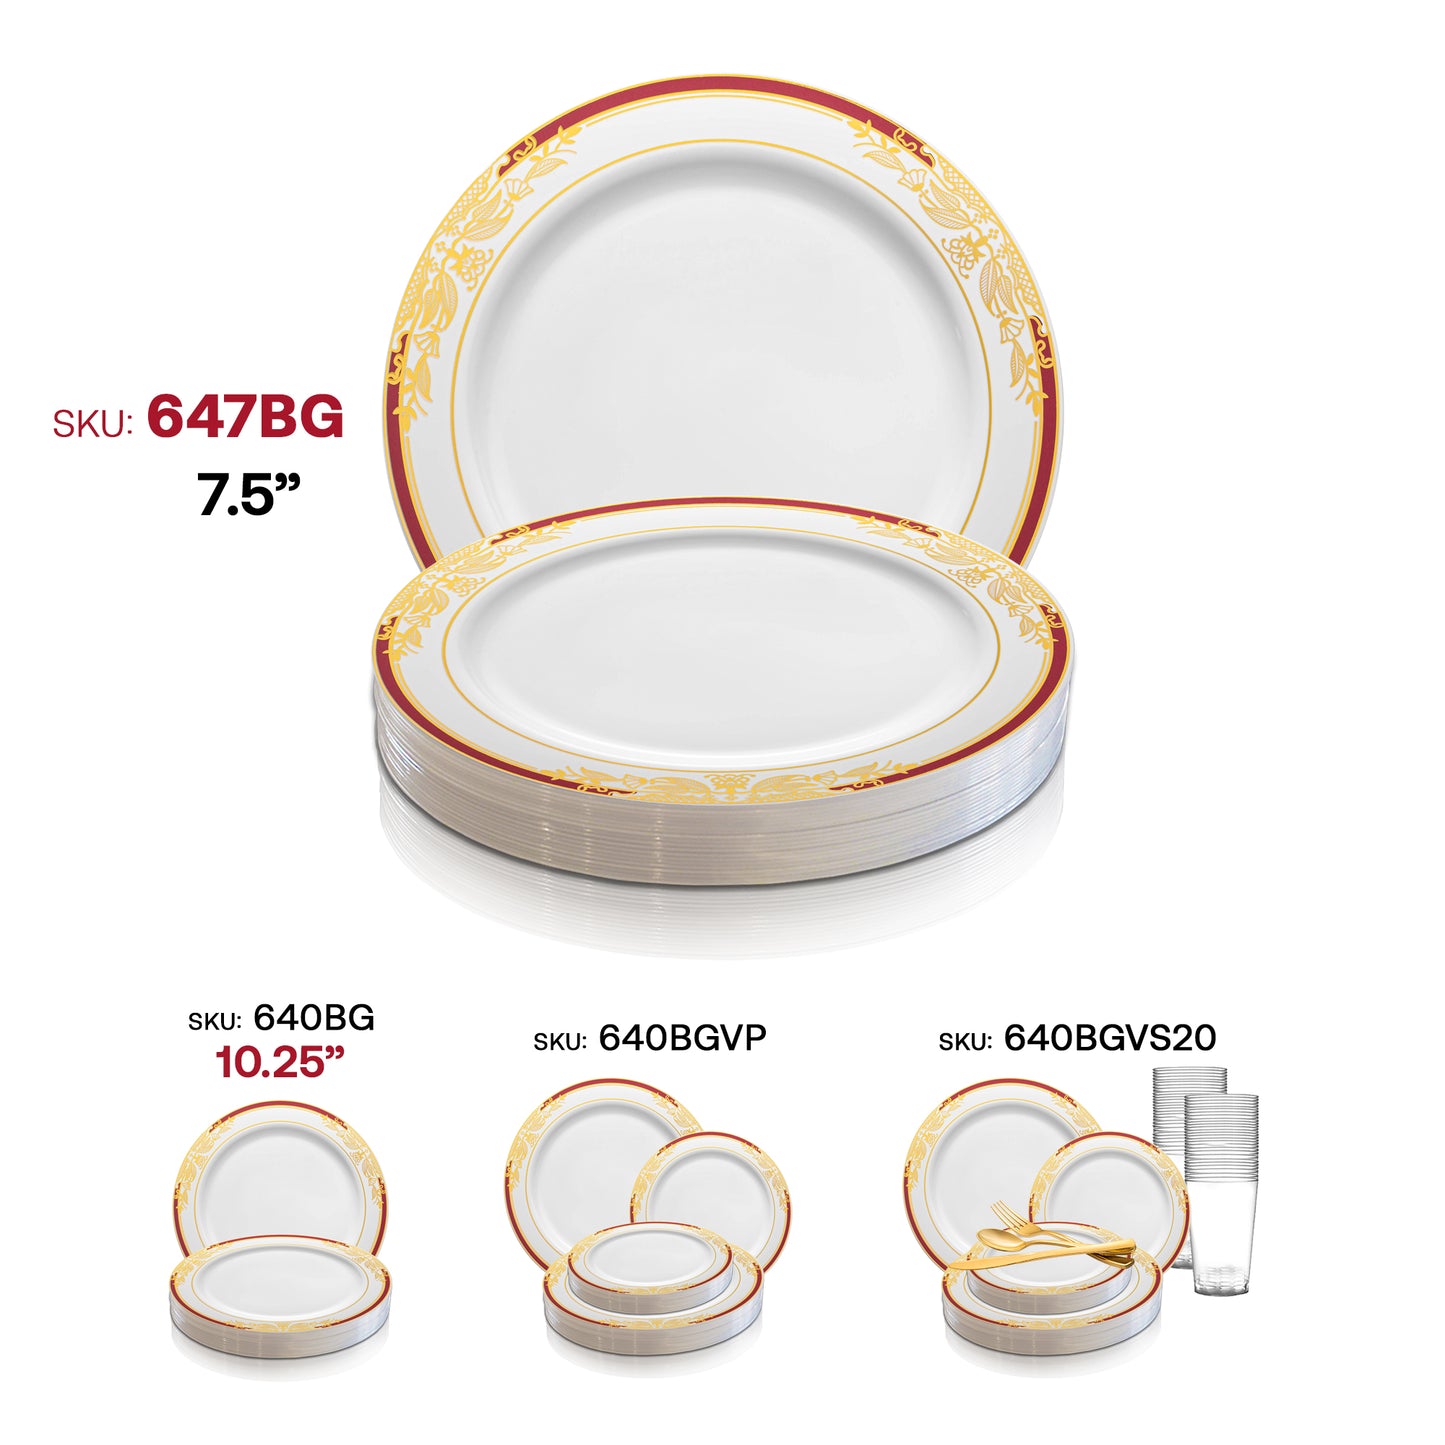 White with Burgundy and Gold Harmony Rim Plastic Appetizer/Salad Plates (7.5") SKU | The Kaya Collection